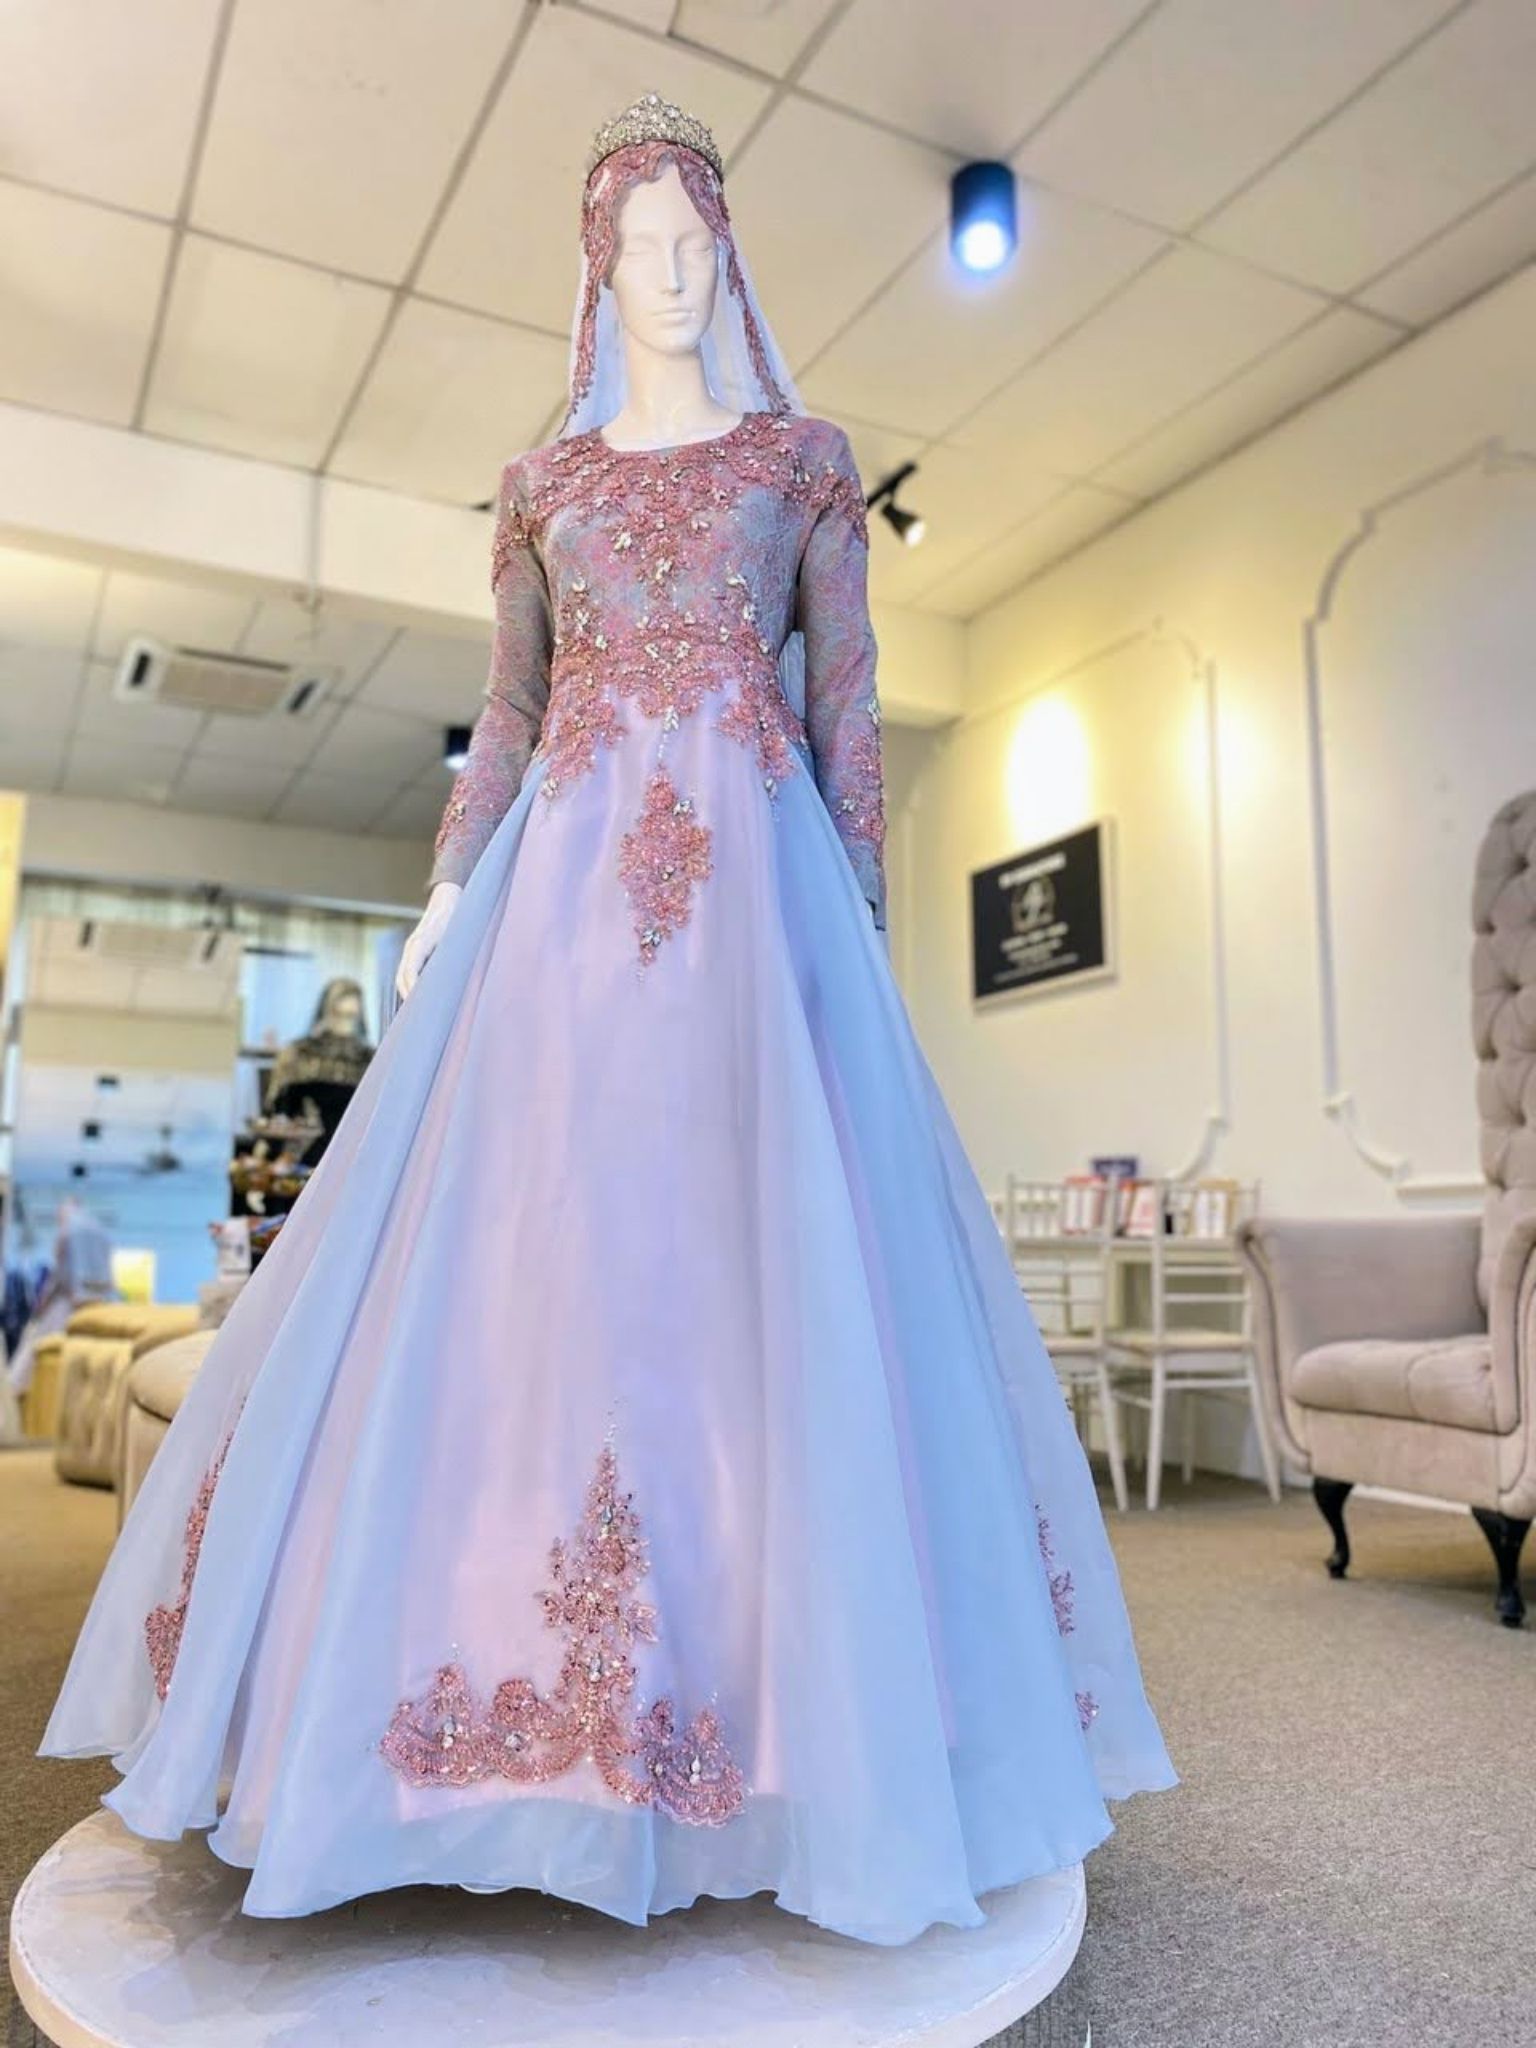 Capture the essence of elegance with our ESKAYLA - Baju Pengantin Ballgown Songket Dusty Blue & Pink & Kot Raihan 3pcs. This exquisite ensemble combines traditional craftsmanship with contemporary design, showcasing the beauty of songket fabric in stunning dusty blue and pink shades. Perfect for a glamorous wedding, embrace the allure of this captivating ballgown and Kot Raihan 3pcs set.